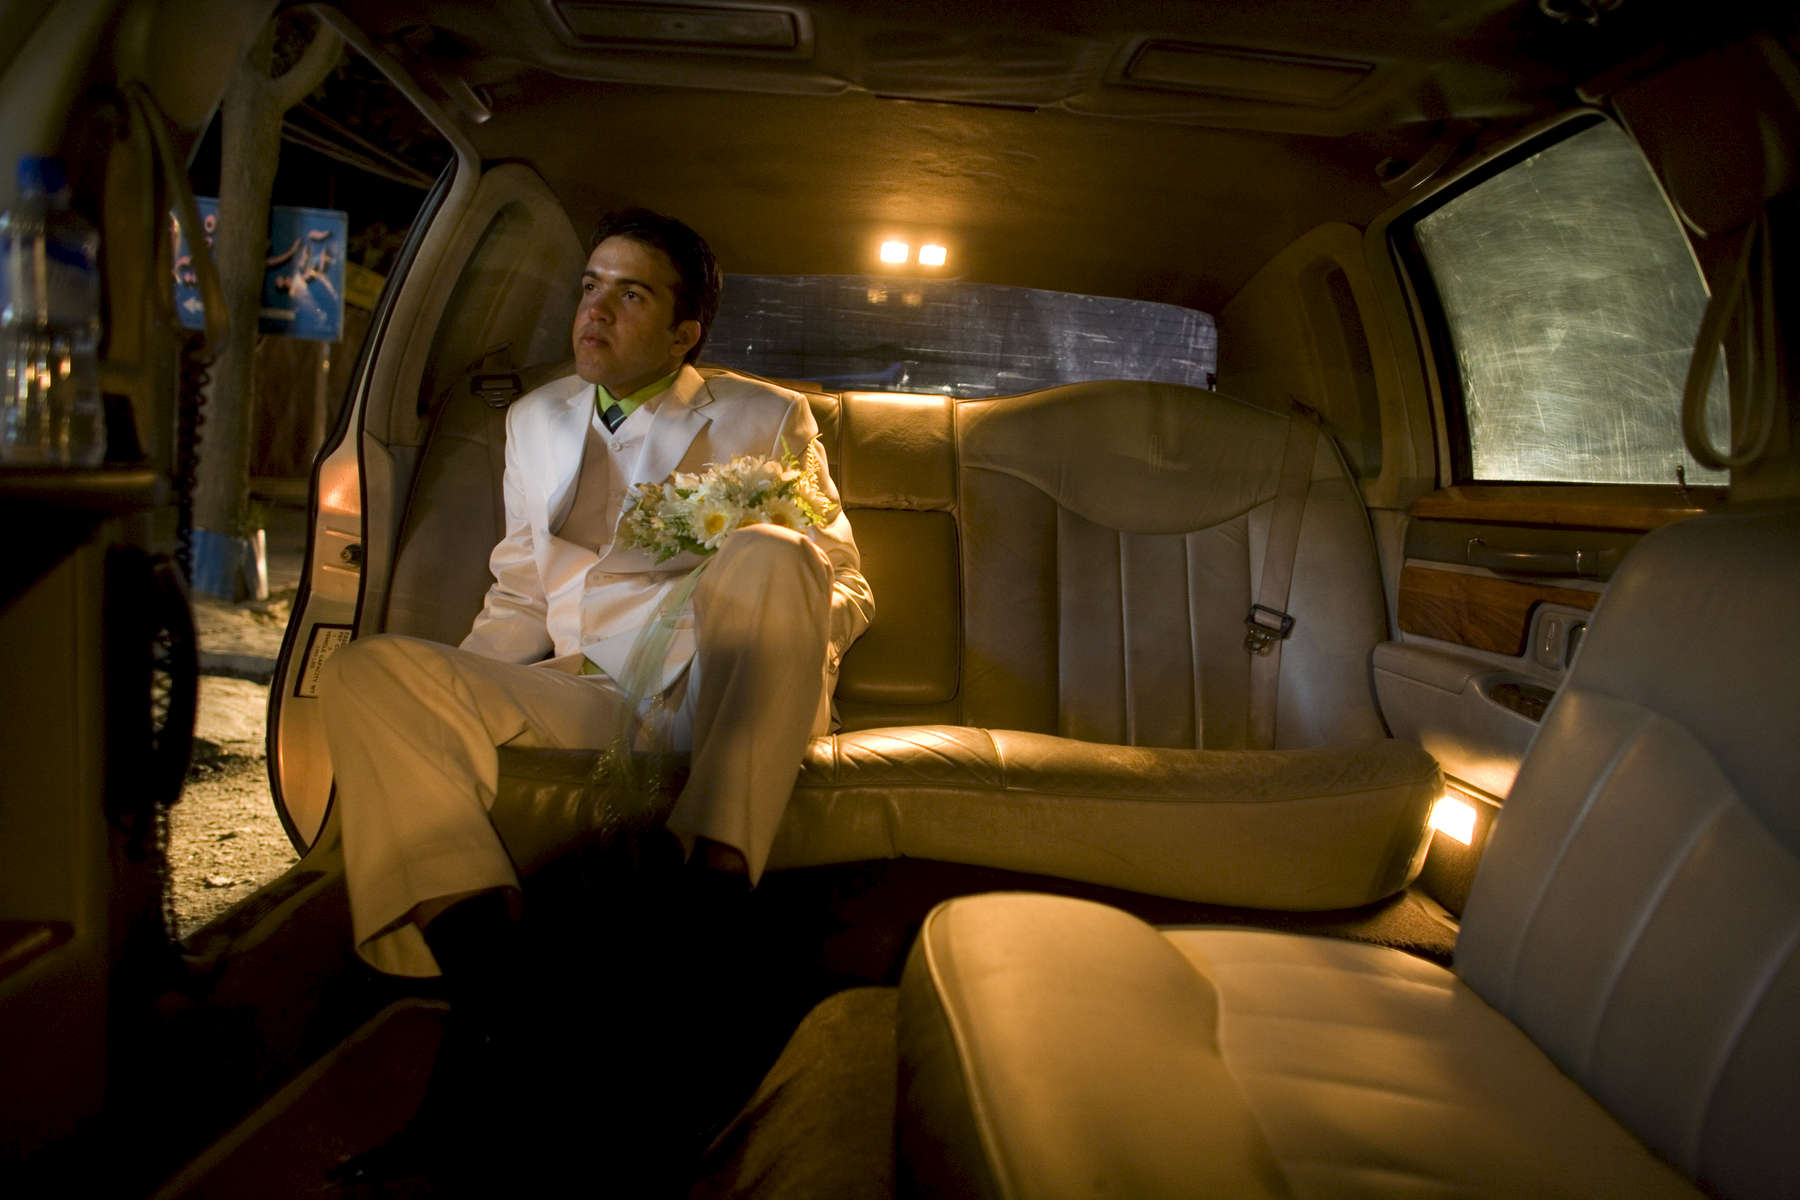 KABUL-AFGHANISTAN-JULY 31: Afghan groom Qais Habibi,19, patiently waits inside a Lincoln limousine for his new bride to finish getting ready at the bridal salon in Kabul July 31, 2007 Afghanistan. Shams Limousine is busy on most days during the busy wedding season renting for 150 USD for 10 hours, shipped from Los Angeles are renting for what he believes is the lowest rate in the world. 